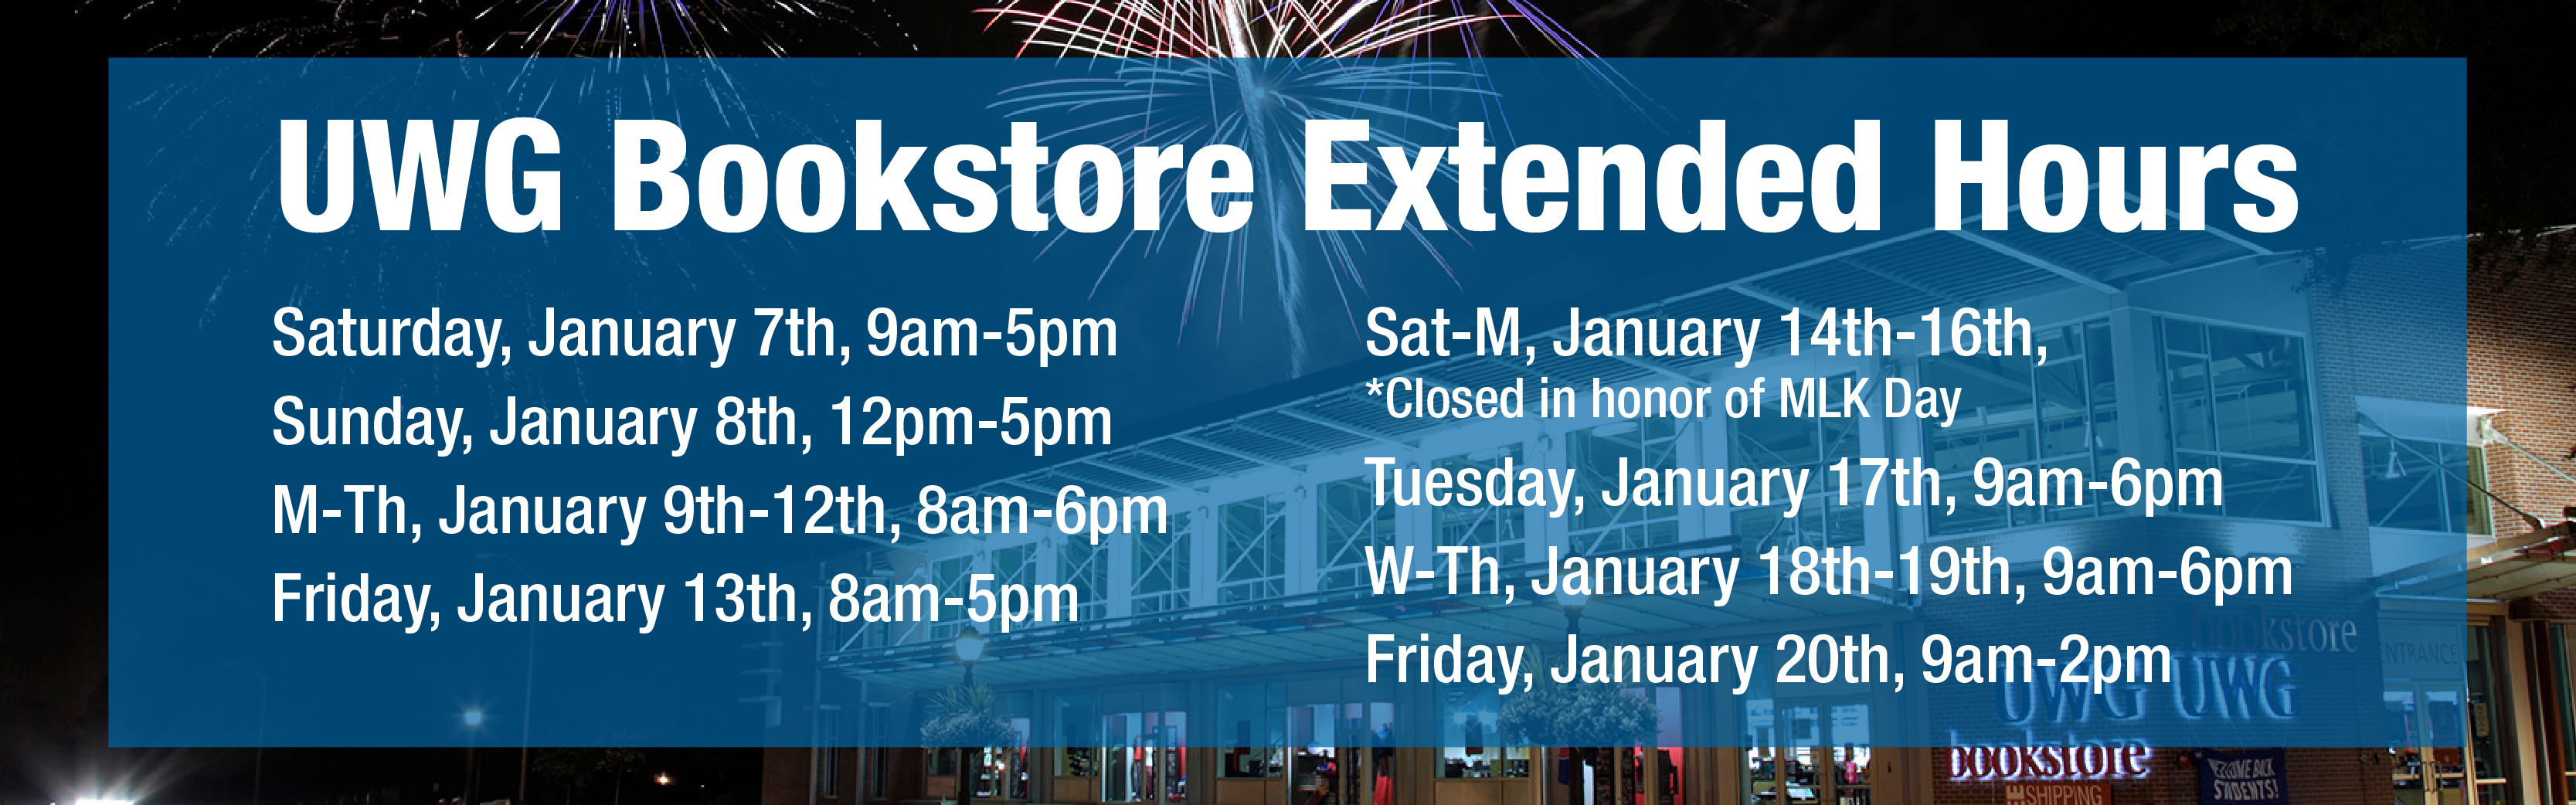 Bookstore Extended Hours for Spring Semester: Saturday, January 7th, 9am-5pm; Sunday, January 8th, 12pm-5pm; M-Th, January 9th-12th, 8am-6pm; Friday, January 13th, 8am-5pm; Sat-M, January 14th-16th, Closed in honor of MLK Day; Tuesday, January 17th, 8am-6pm; W-Th, January 18th-19th, 9am-6pm; Friday, January 20th, 9am-2pm